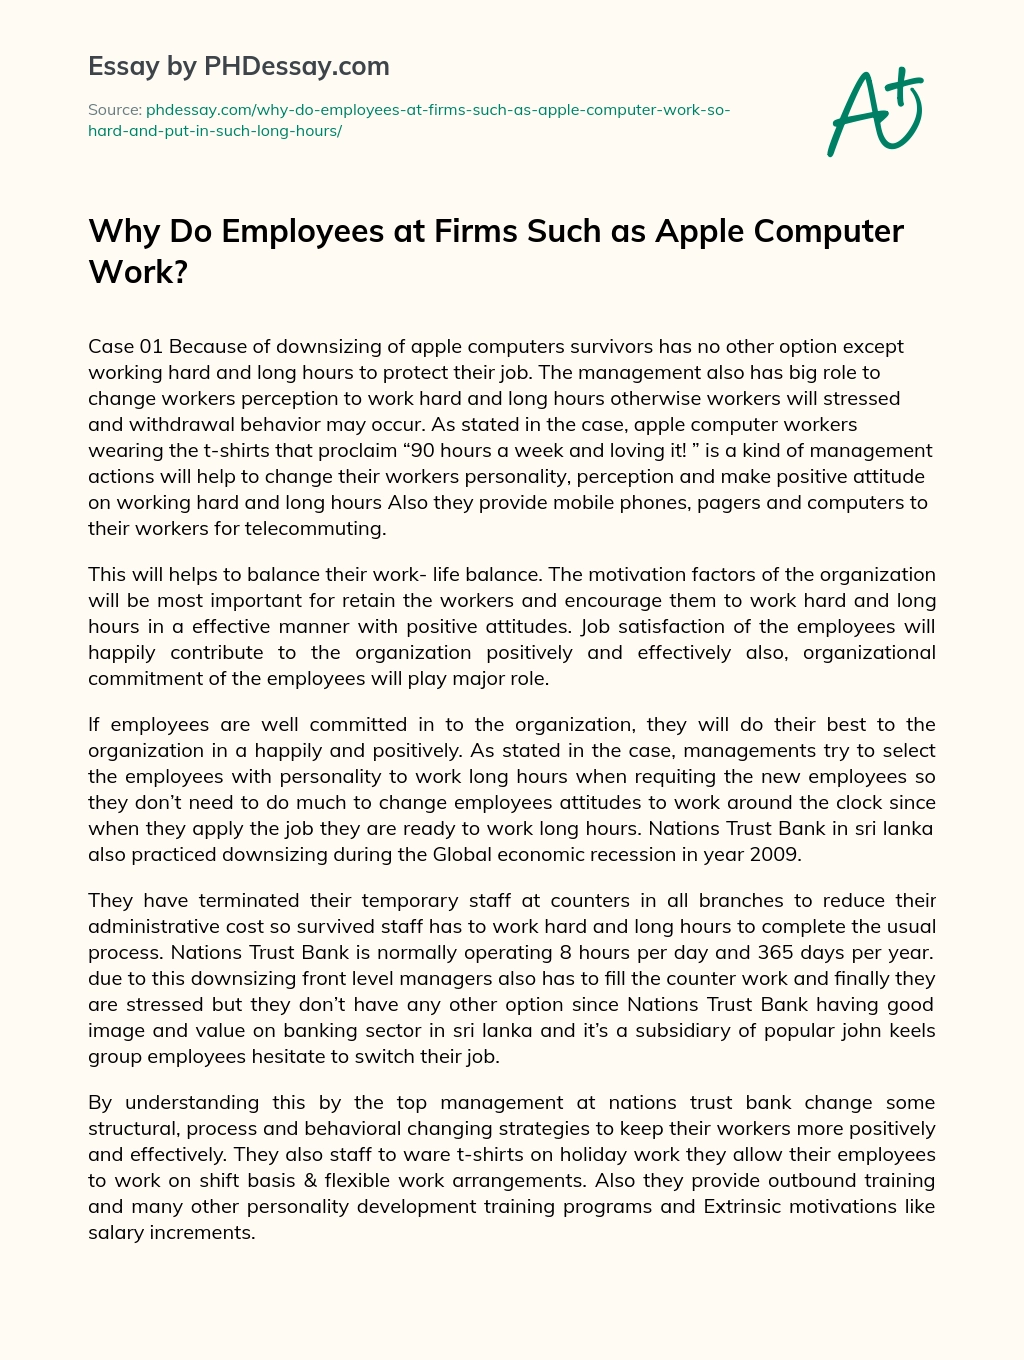 Why Do Employees at Firms Such as Apple Computer Work? essay